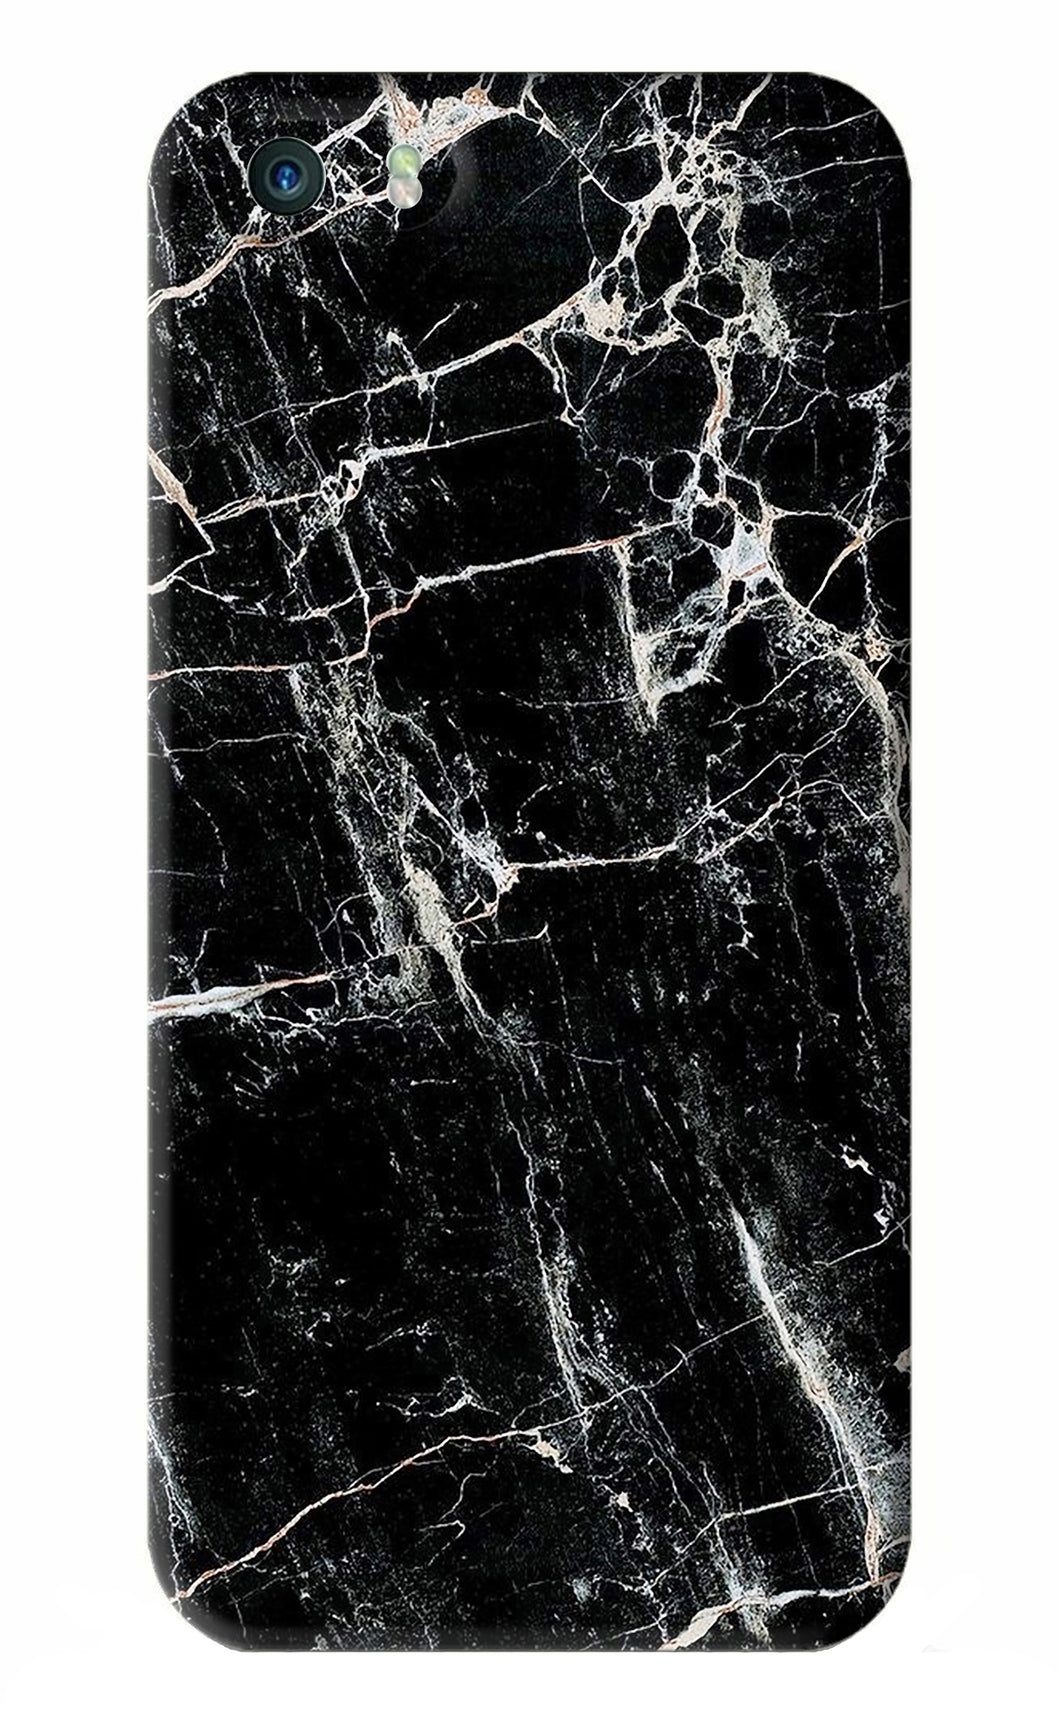 Black Marble Texture 1 iPhone 5S Back Skin Wrap